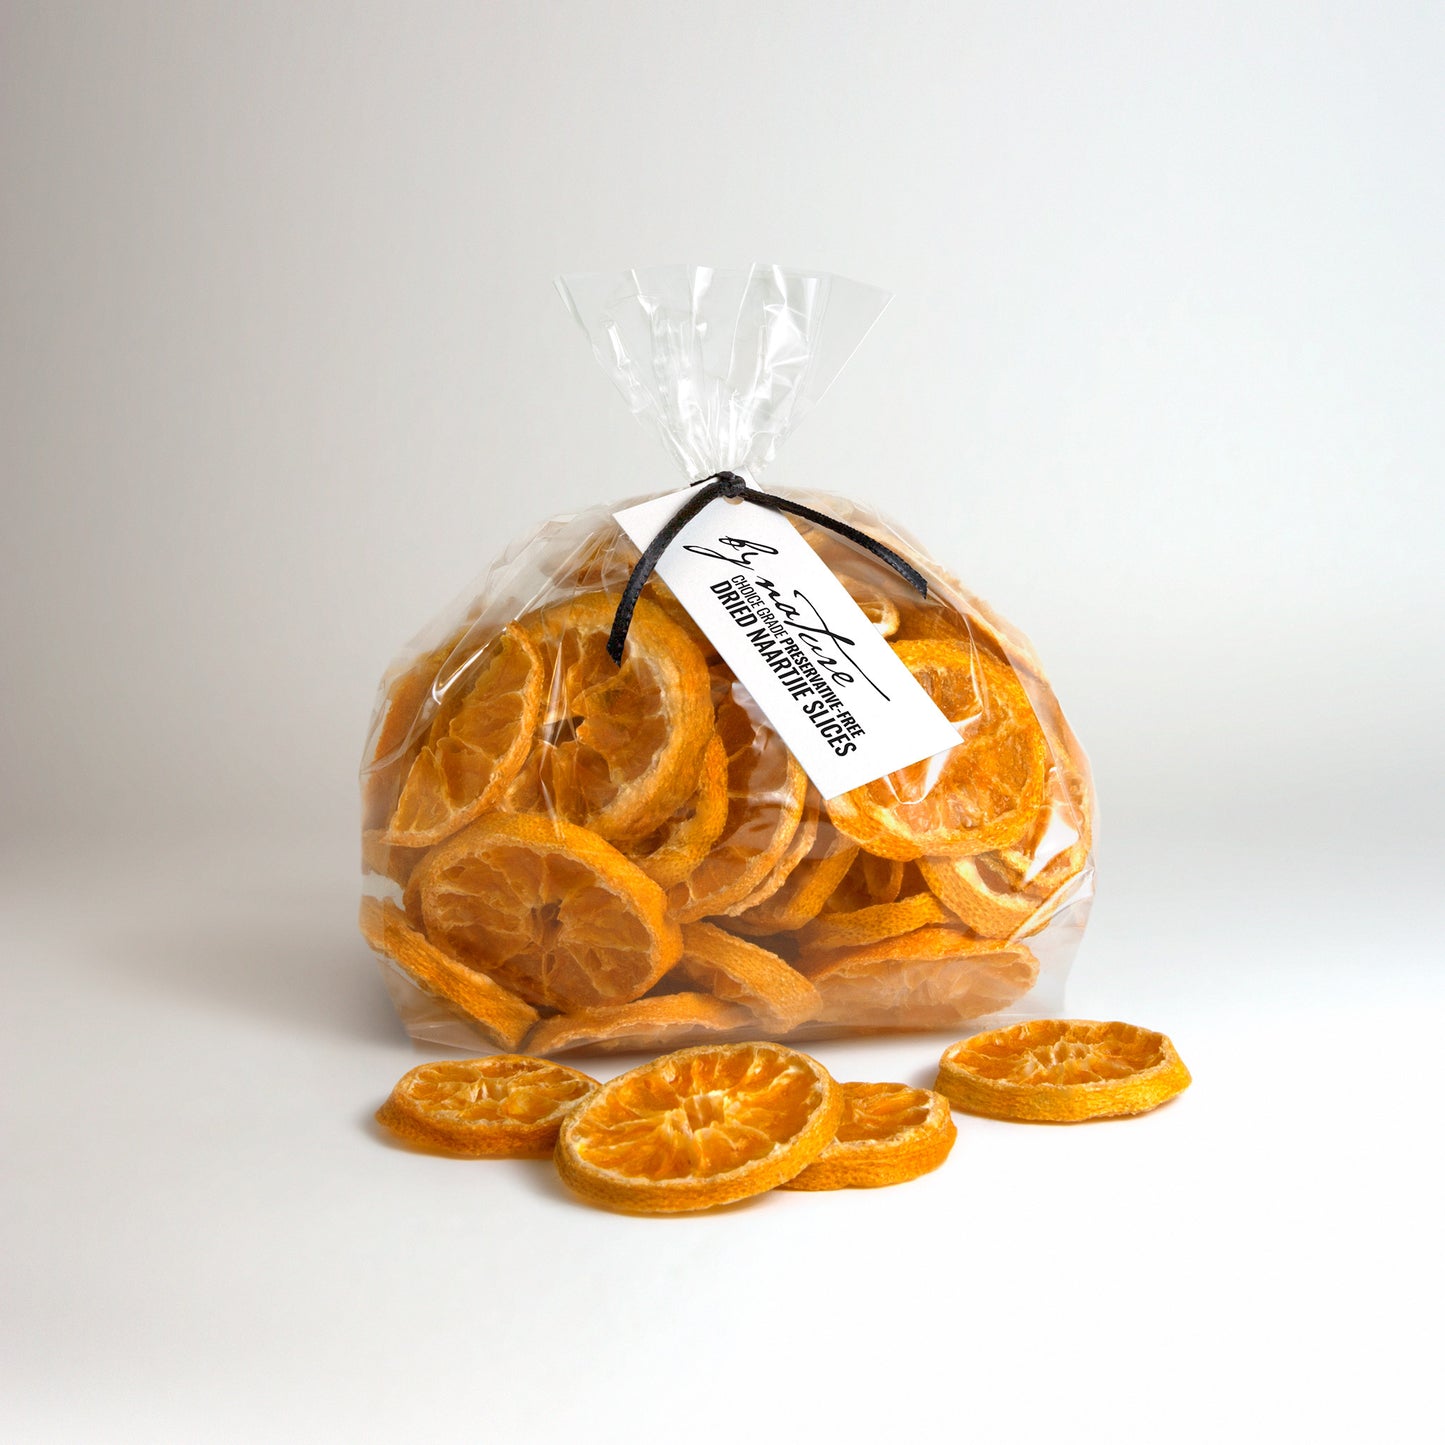 BY NATURE Dried Naartjie Slices, 150g - preservative-free.